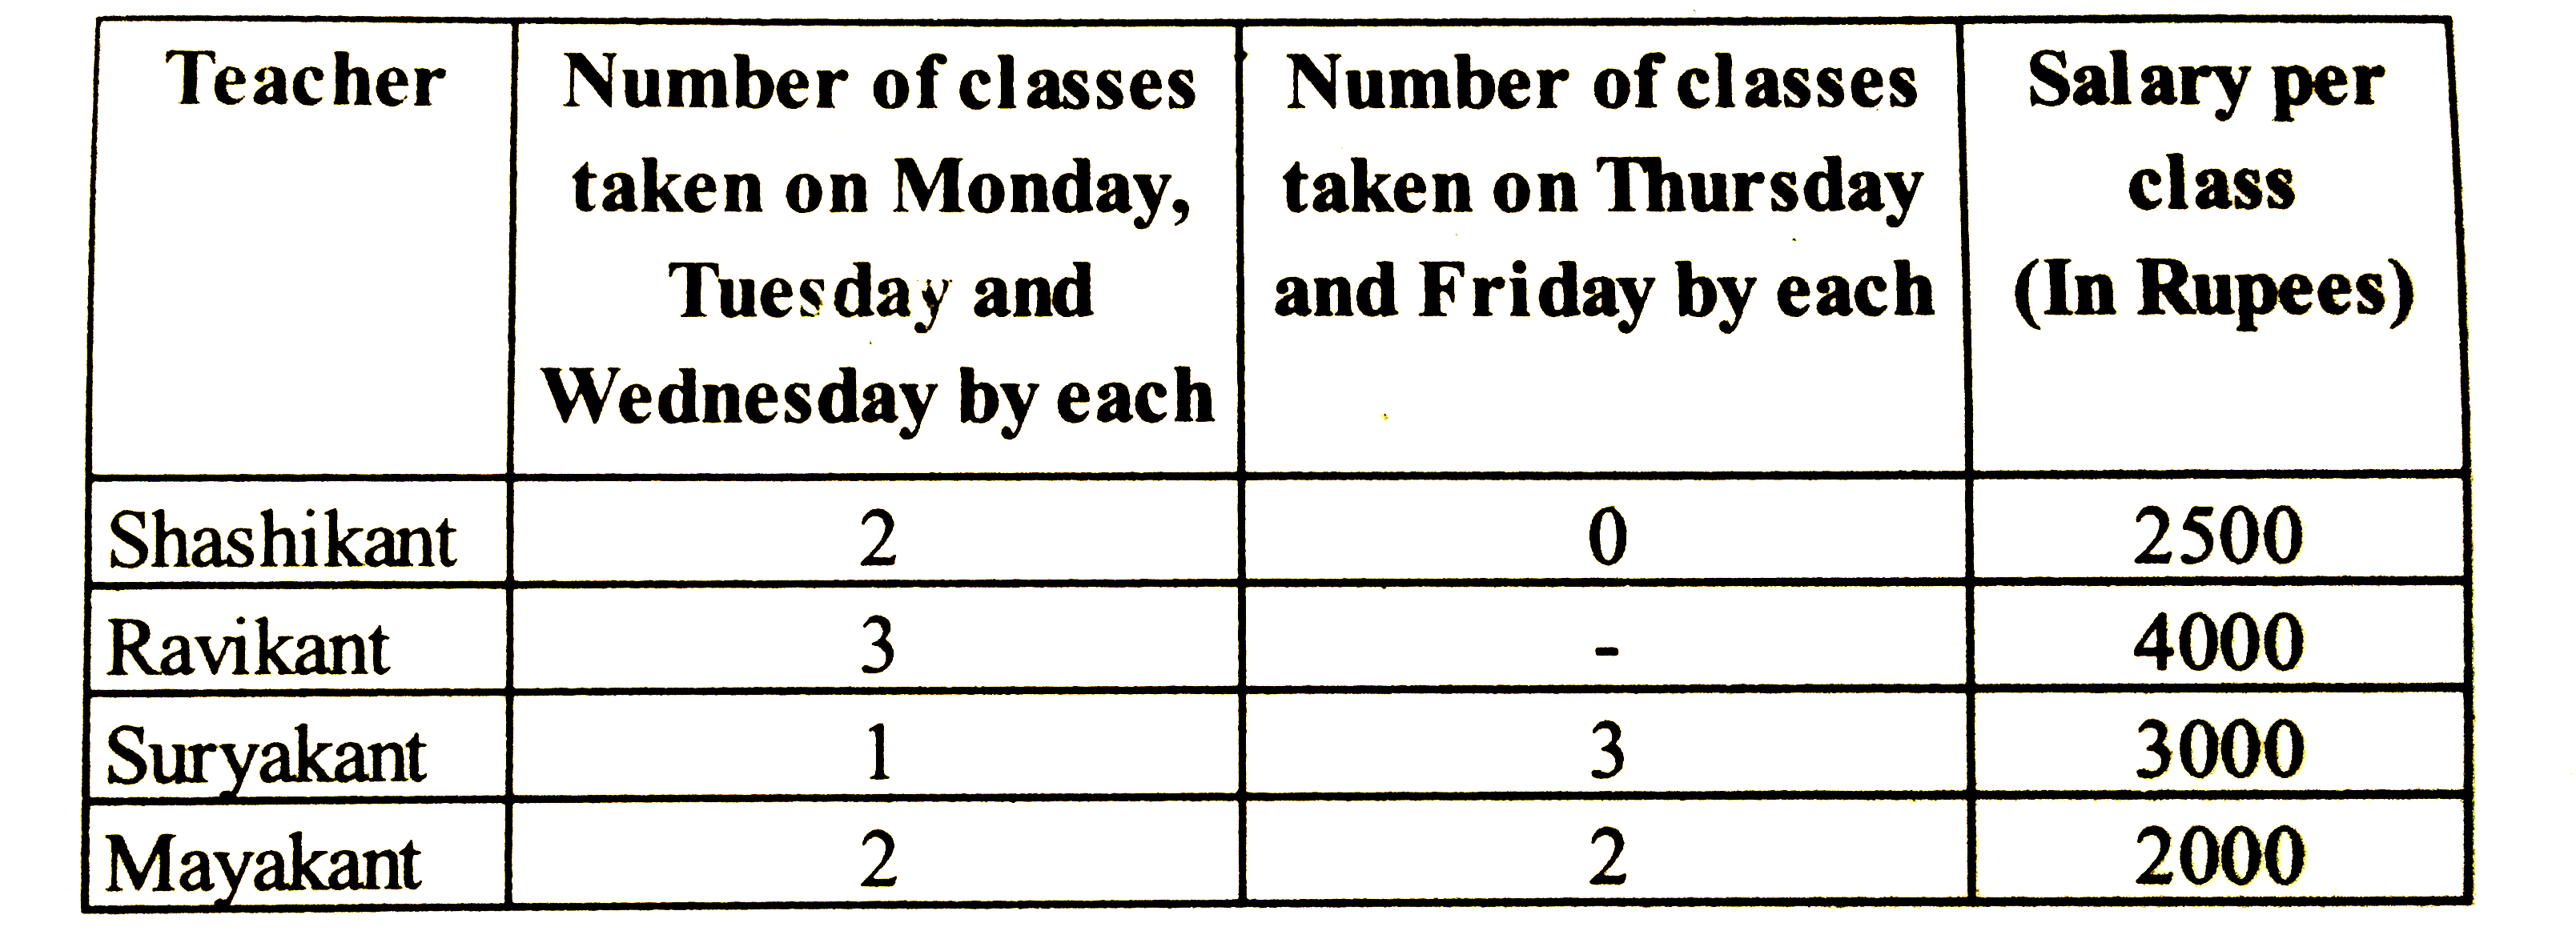 The following table shows the number of classes taken by each Teacher in different days and the total number amount given to the Teacher per class For the certain course also given      Find the ratio of the number of lectures taken by Shashikant to that of the number of letures taken by Mayakant in a week ?